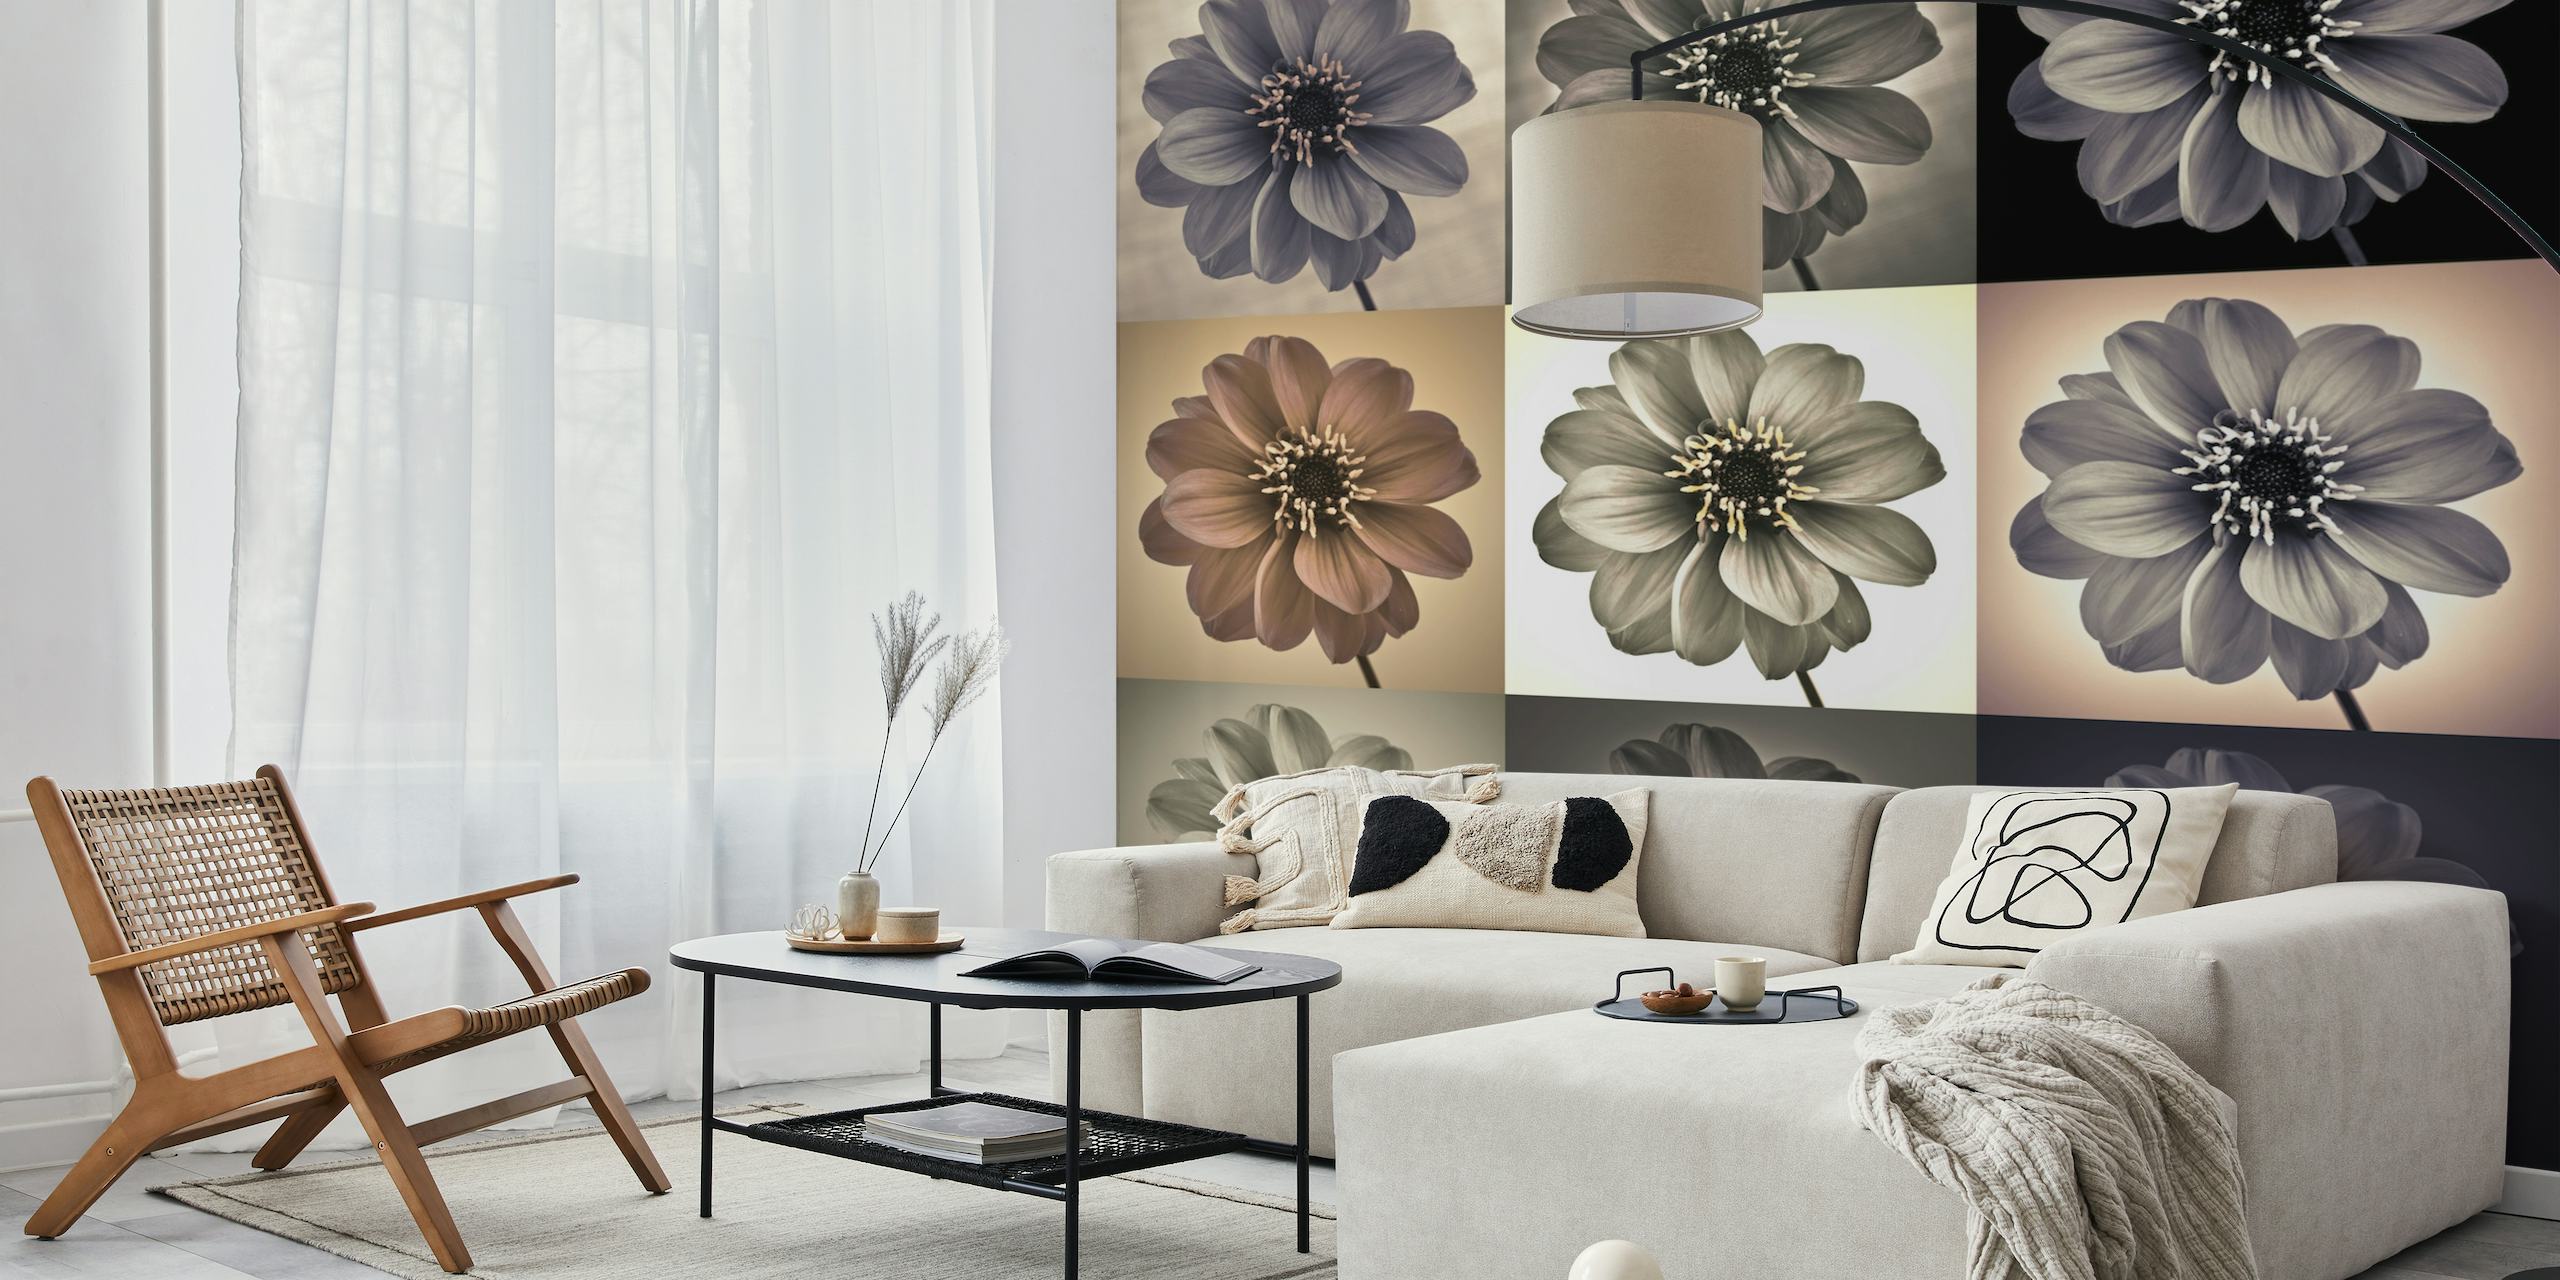 Nine-panel dahlia flower wall mural in sepia and grayscale tones